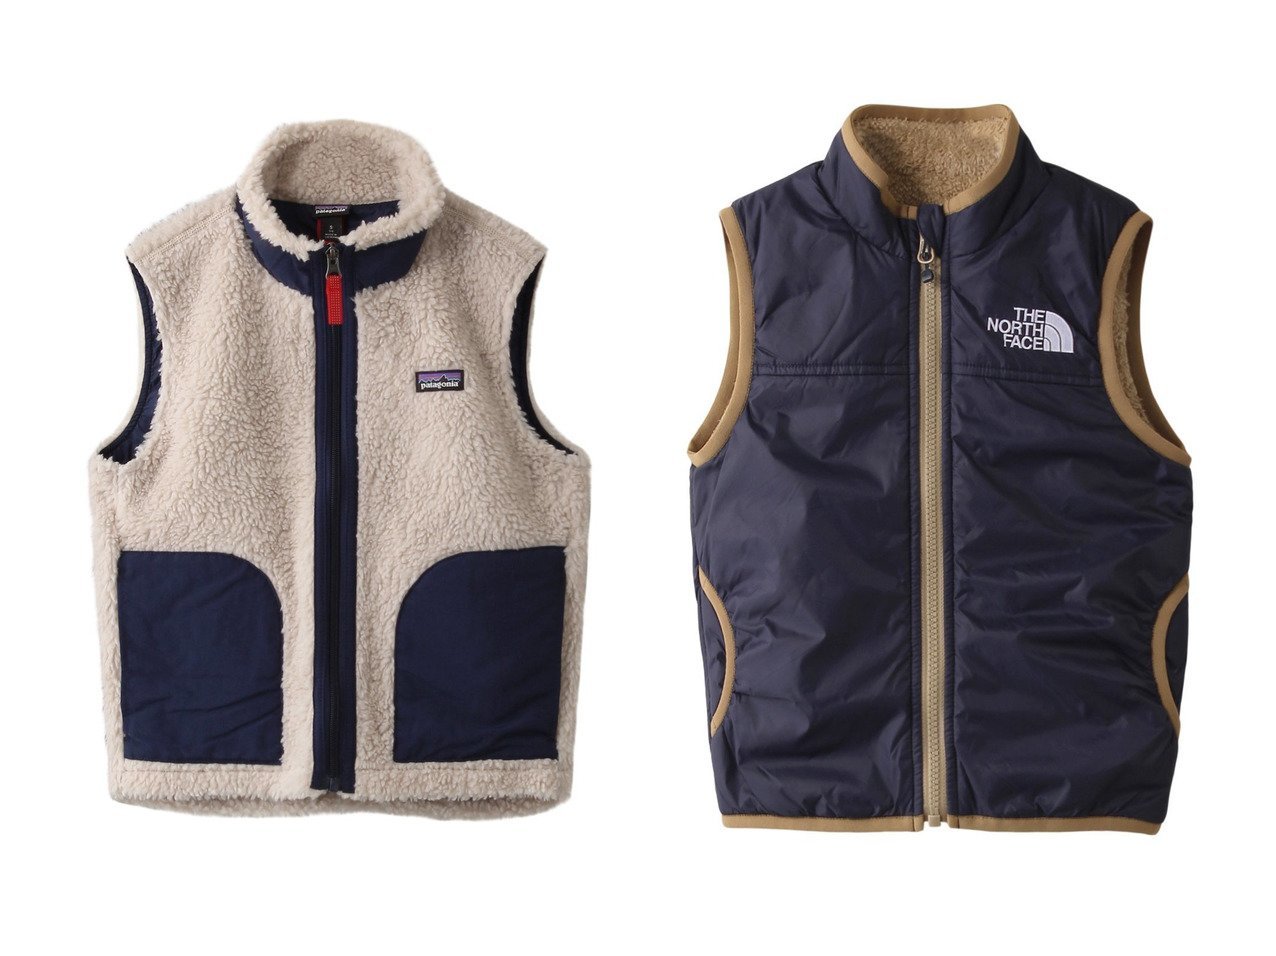 THE NORTH FACE リバーシブルベスト キッズ服-